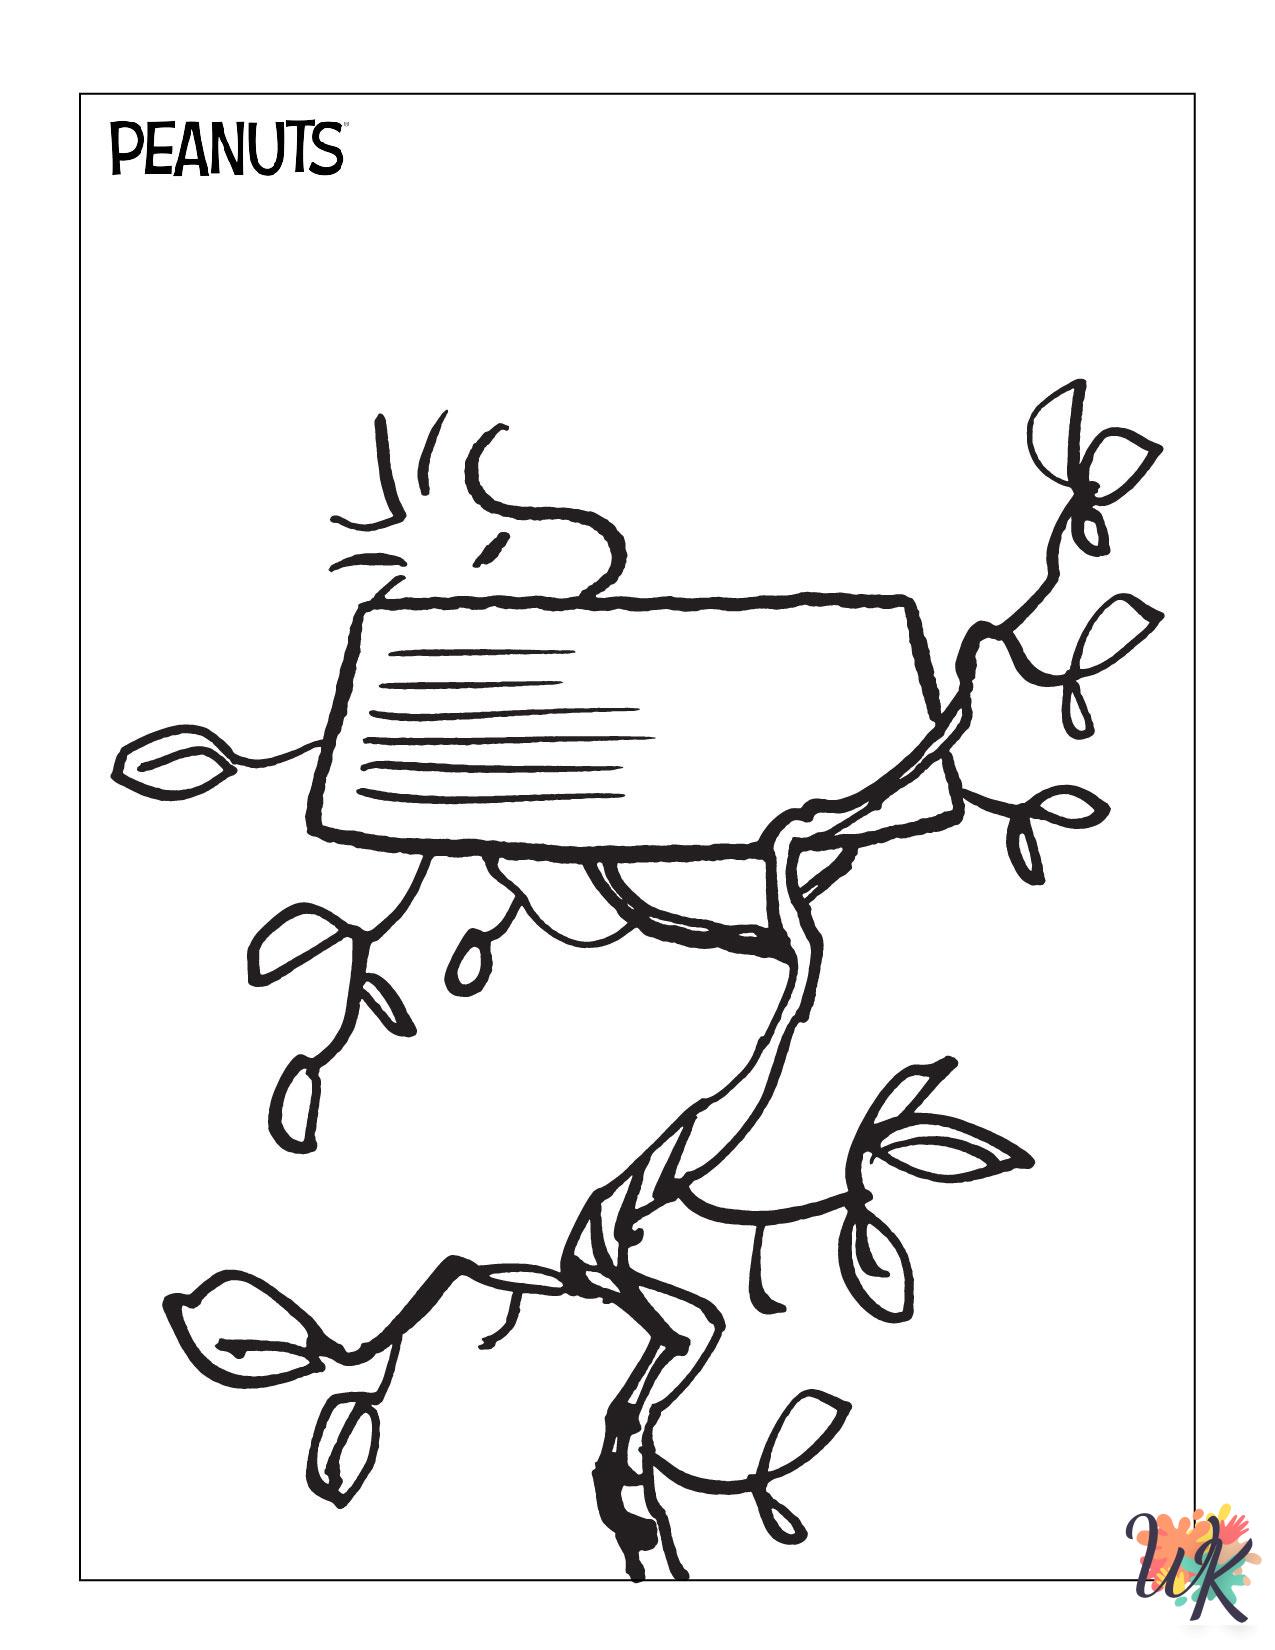 Peanuts coloring pages for adults